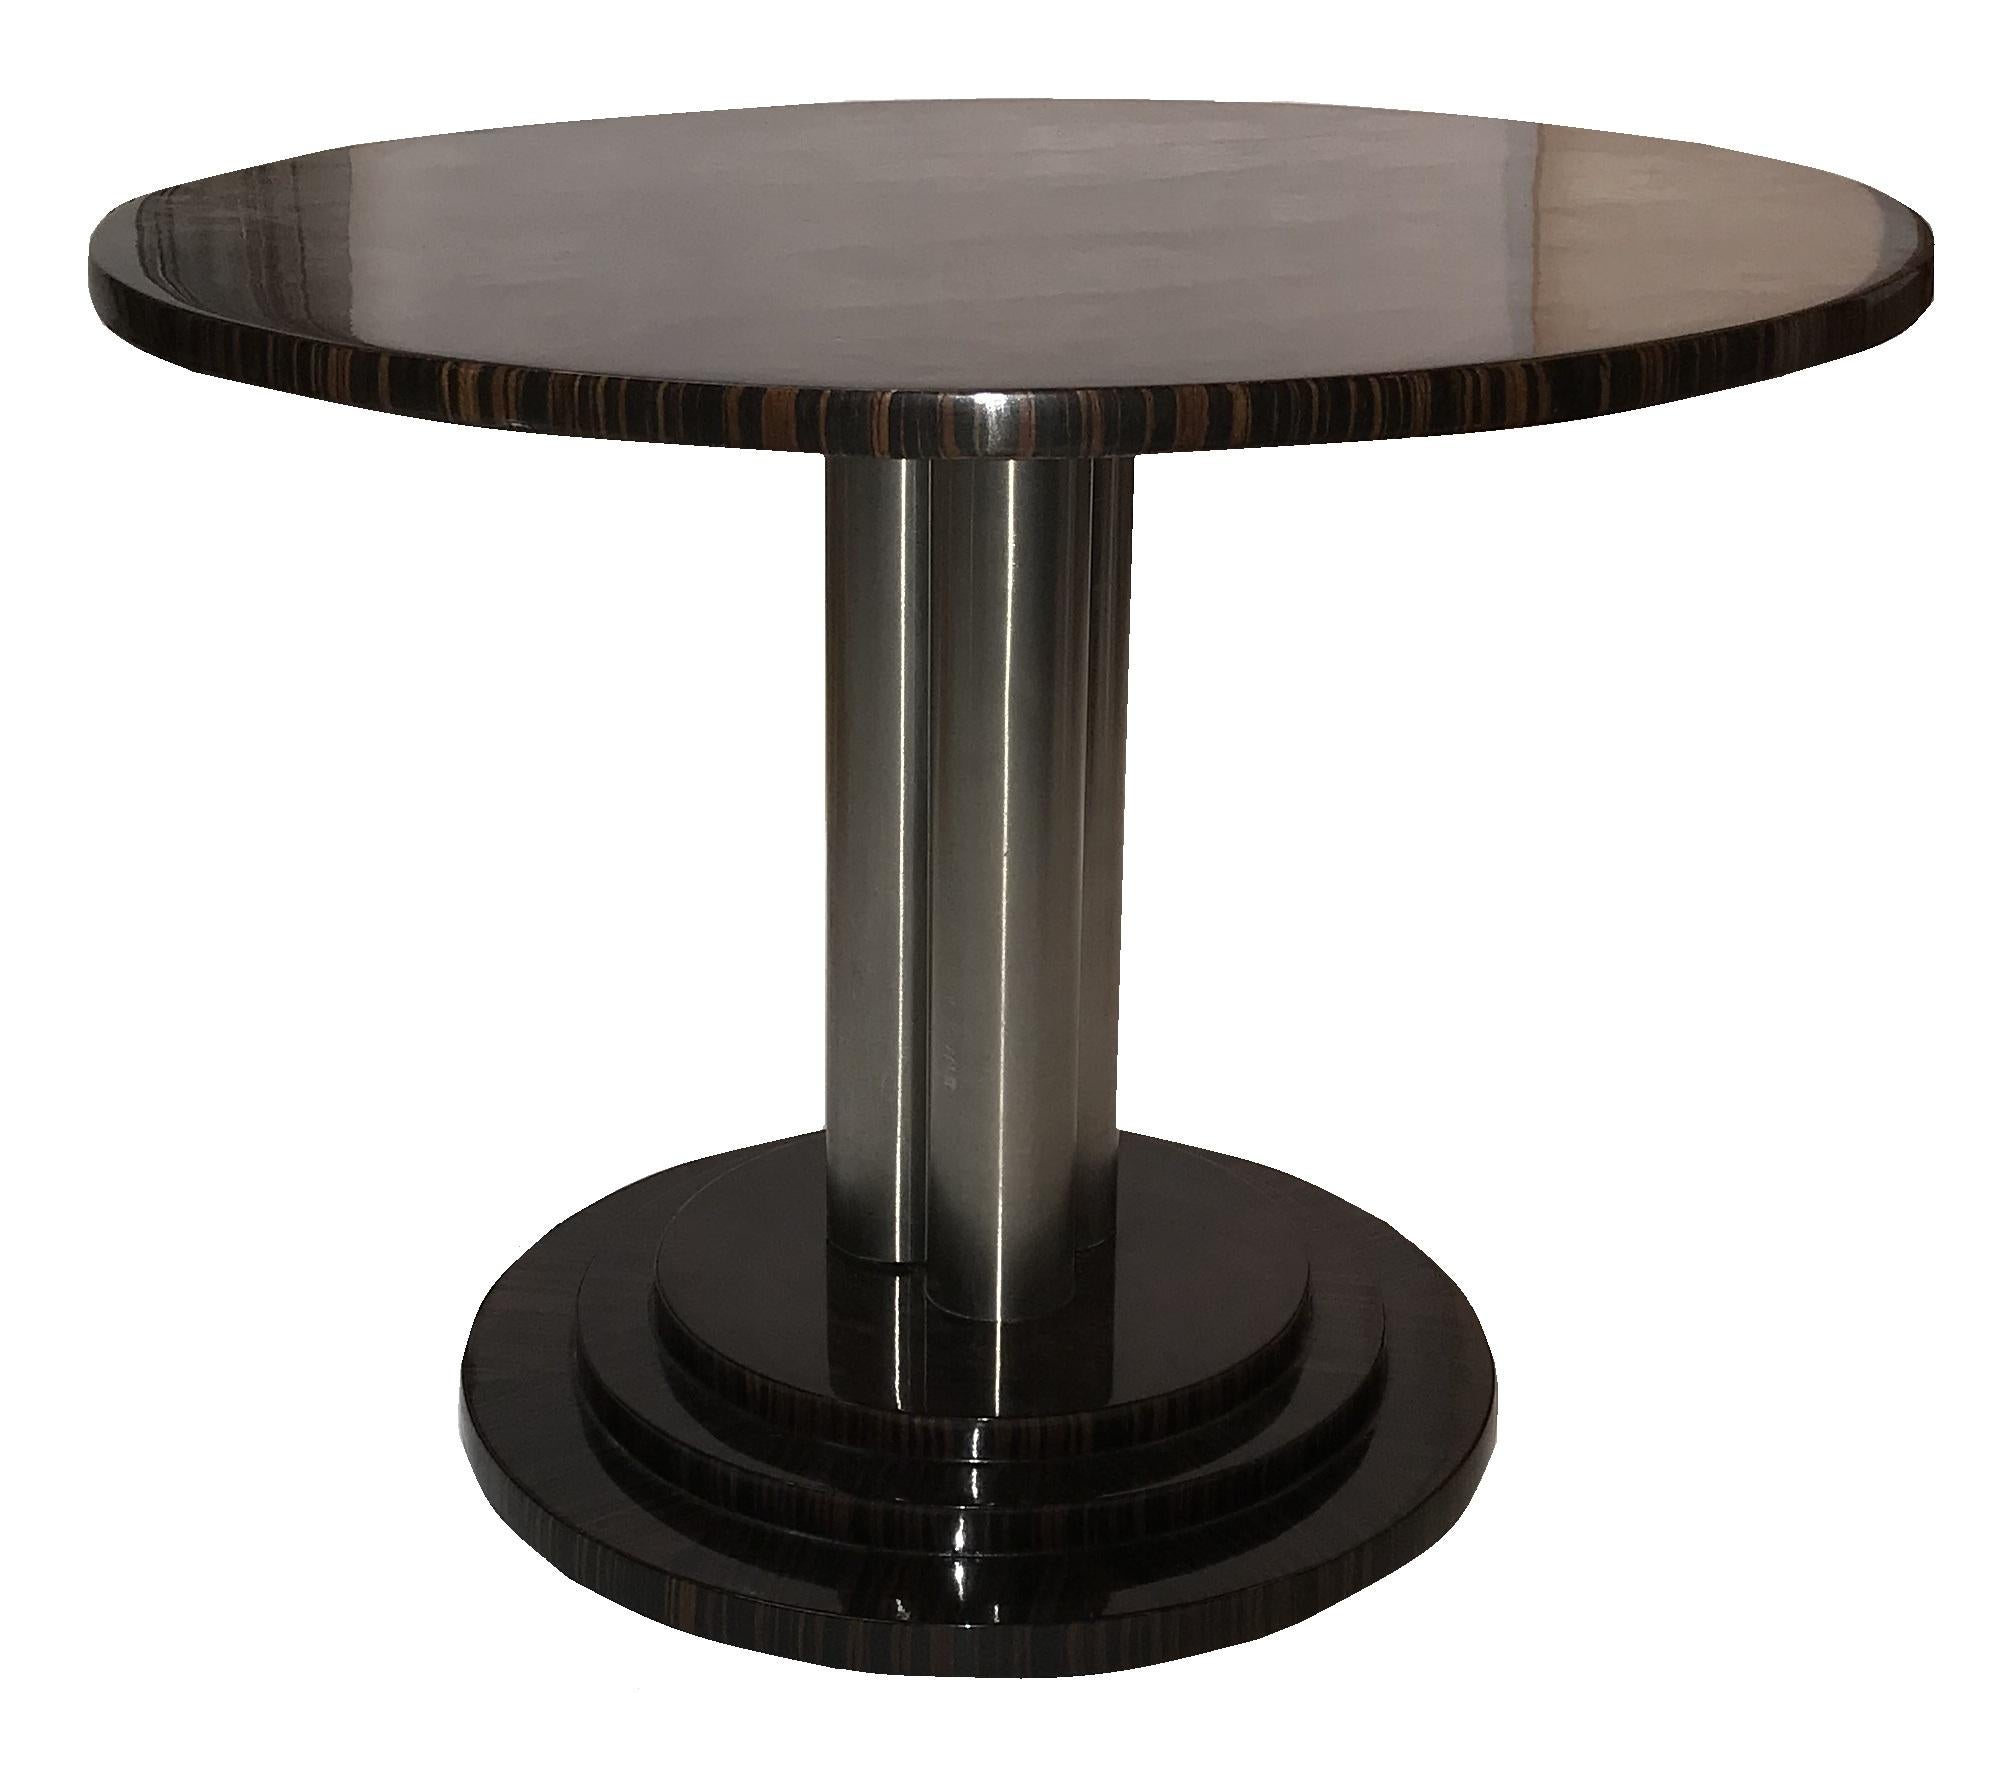 Mid-20th Century 2 Tables in Wood and Chrome, France, 1930 For Sale